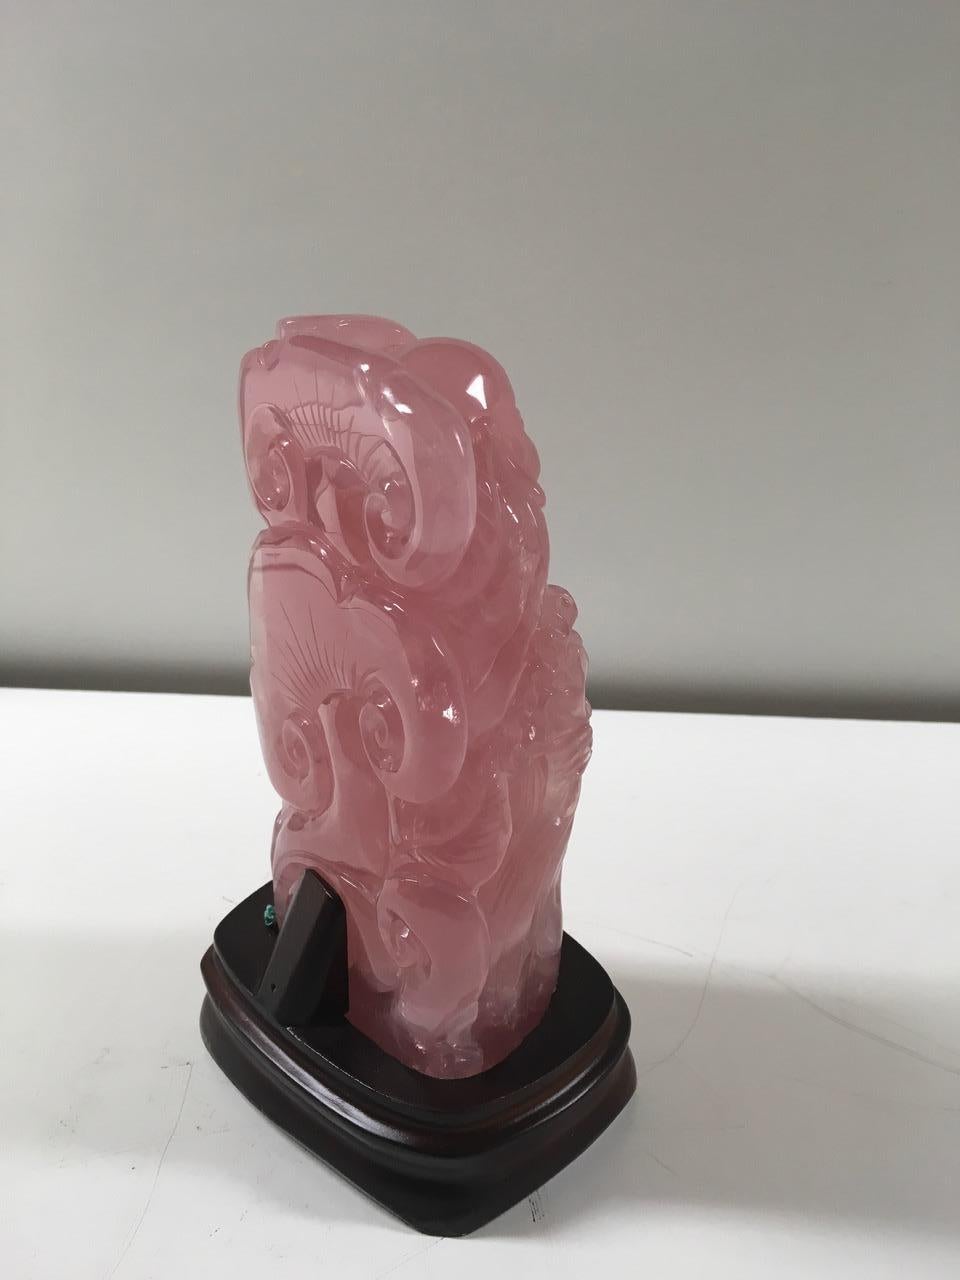 Chinese Beautiful Carved Rose Quartz Sculpture For Sale